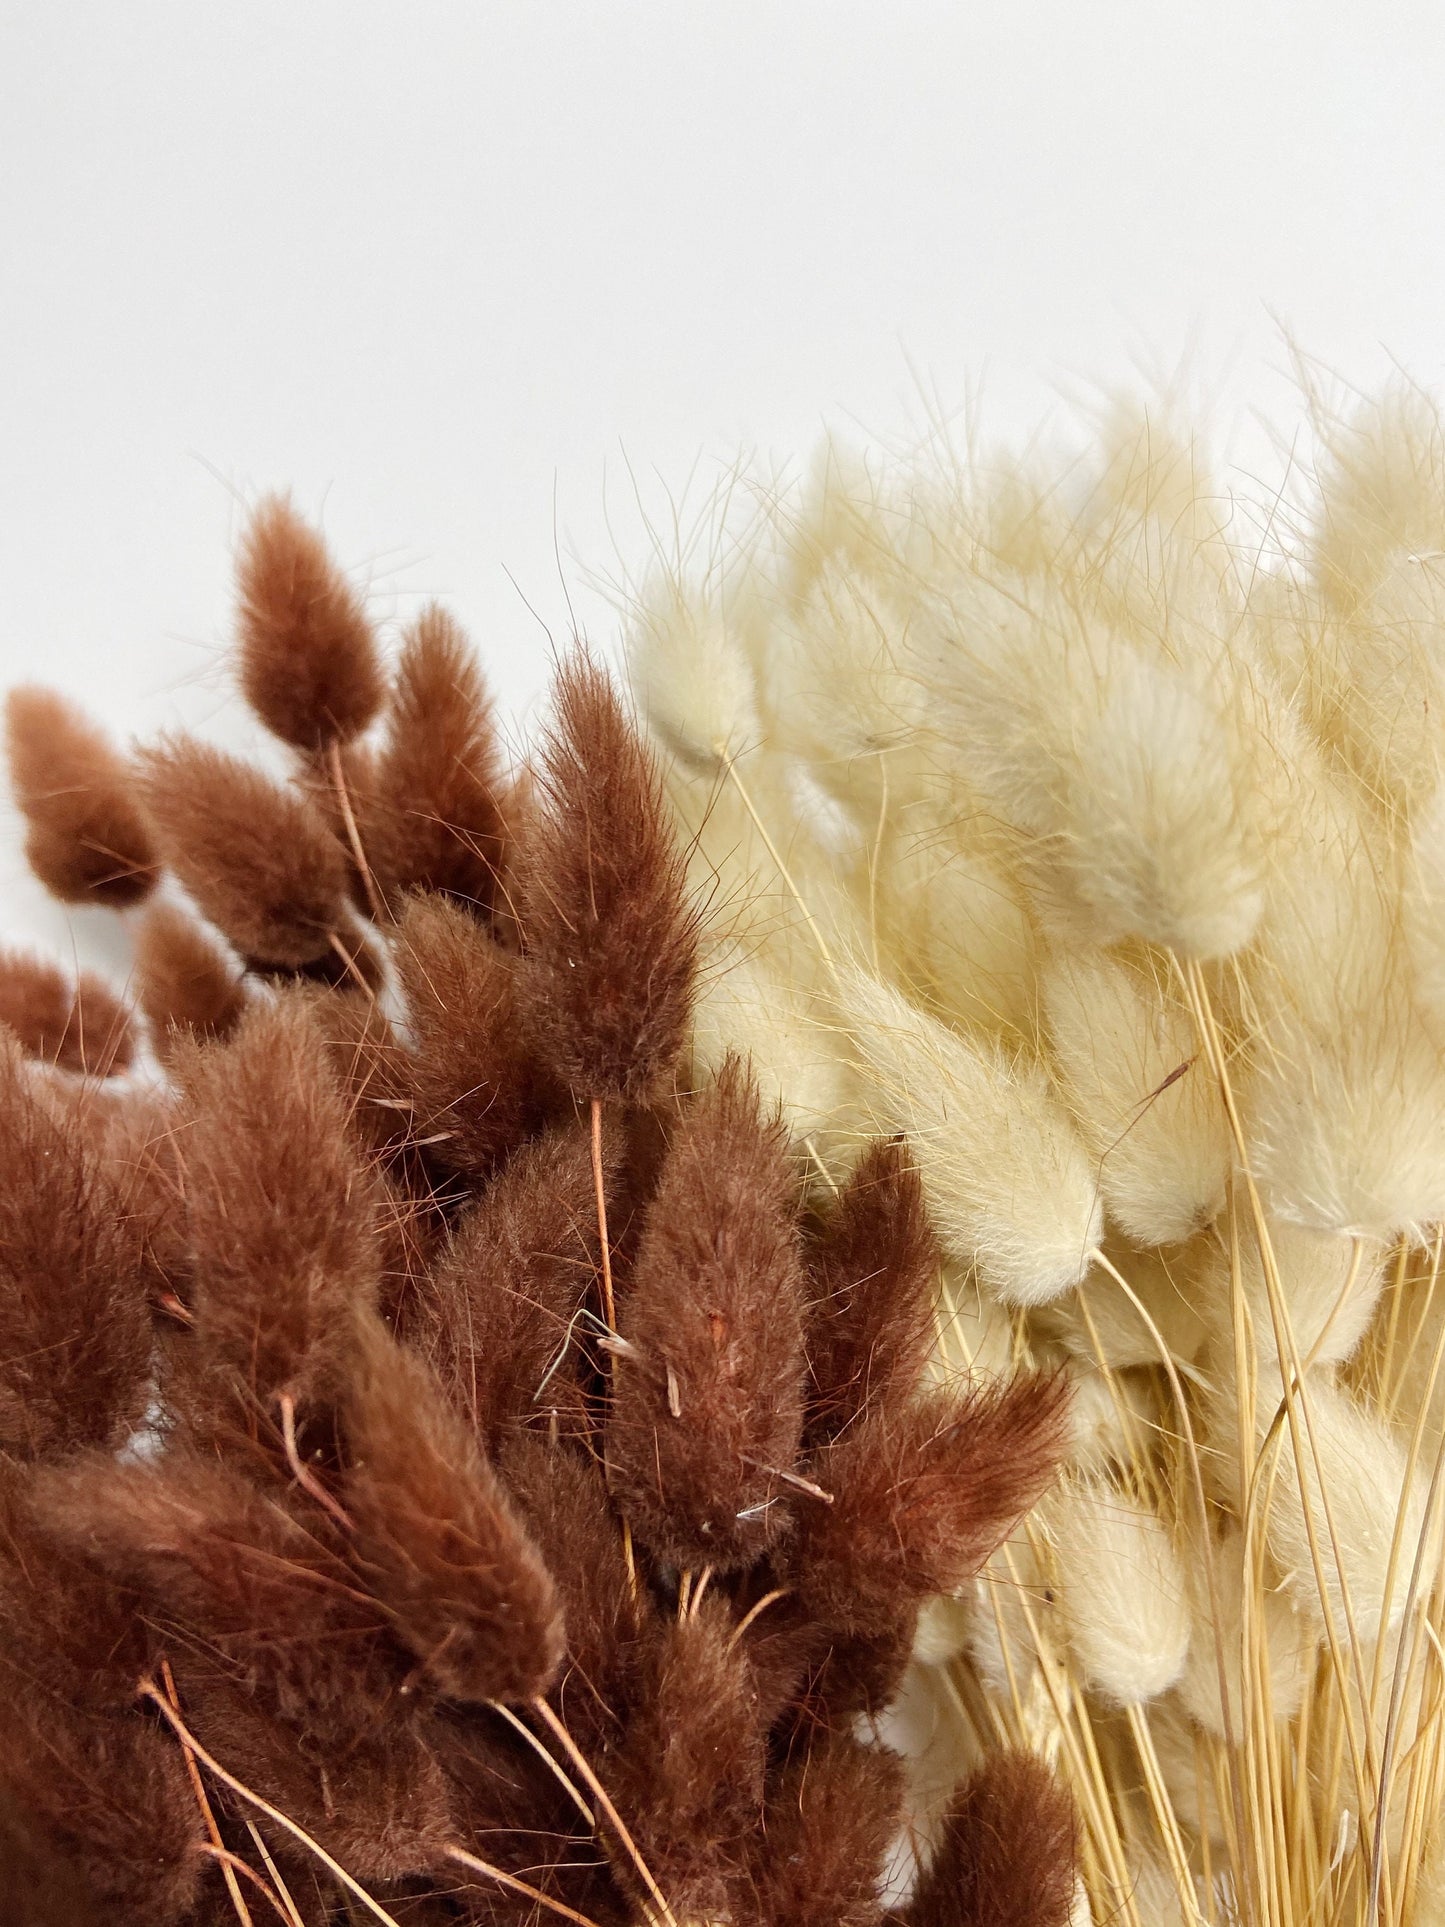 Bunny Tails, Preserved Flowers, Largurus, Dried Largurus, Bunny Tail Grass, Brown, White, Natural, Soft Flowers, House Decor, Wedding Decor